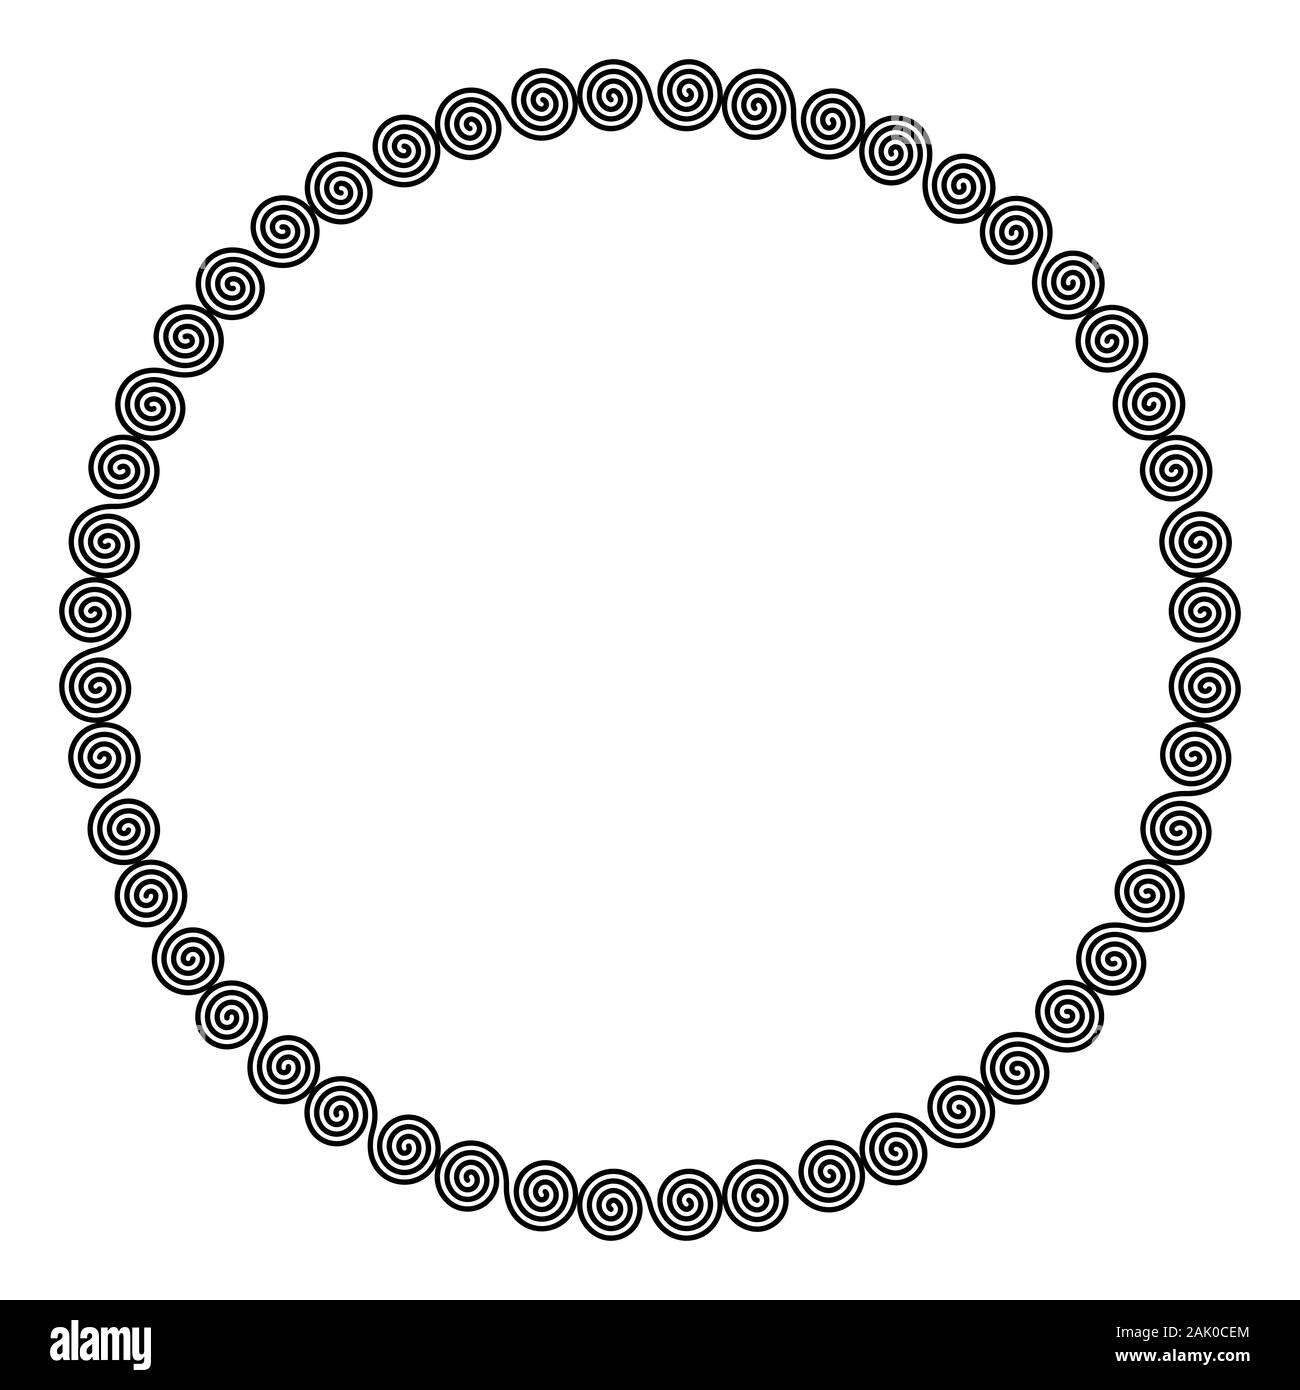 Circle shaped frame of linear double spirals. Interlocked, combined spirals, a decorative border, constructed from lines, shaped into a repeated motif Stock Photo